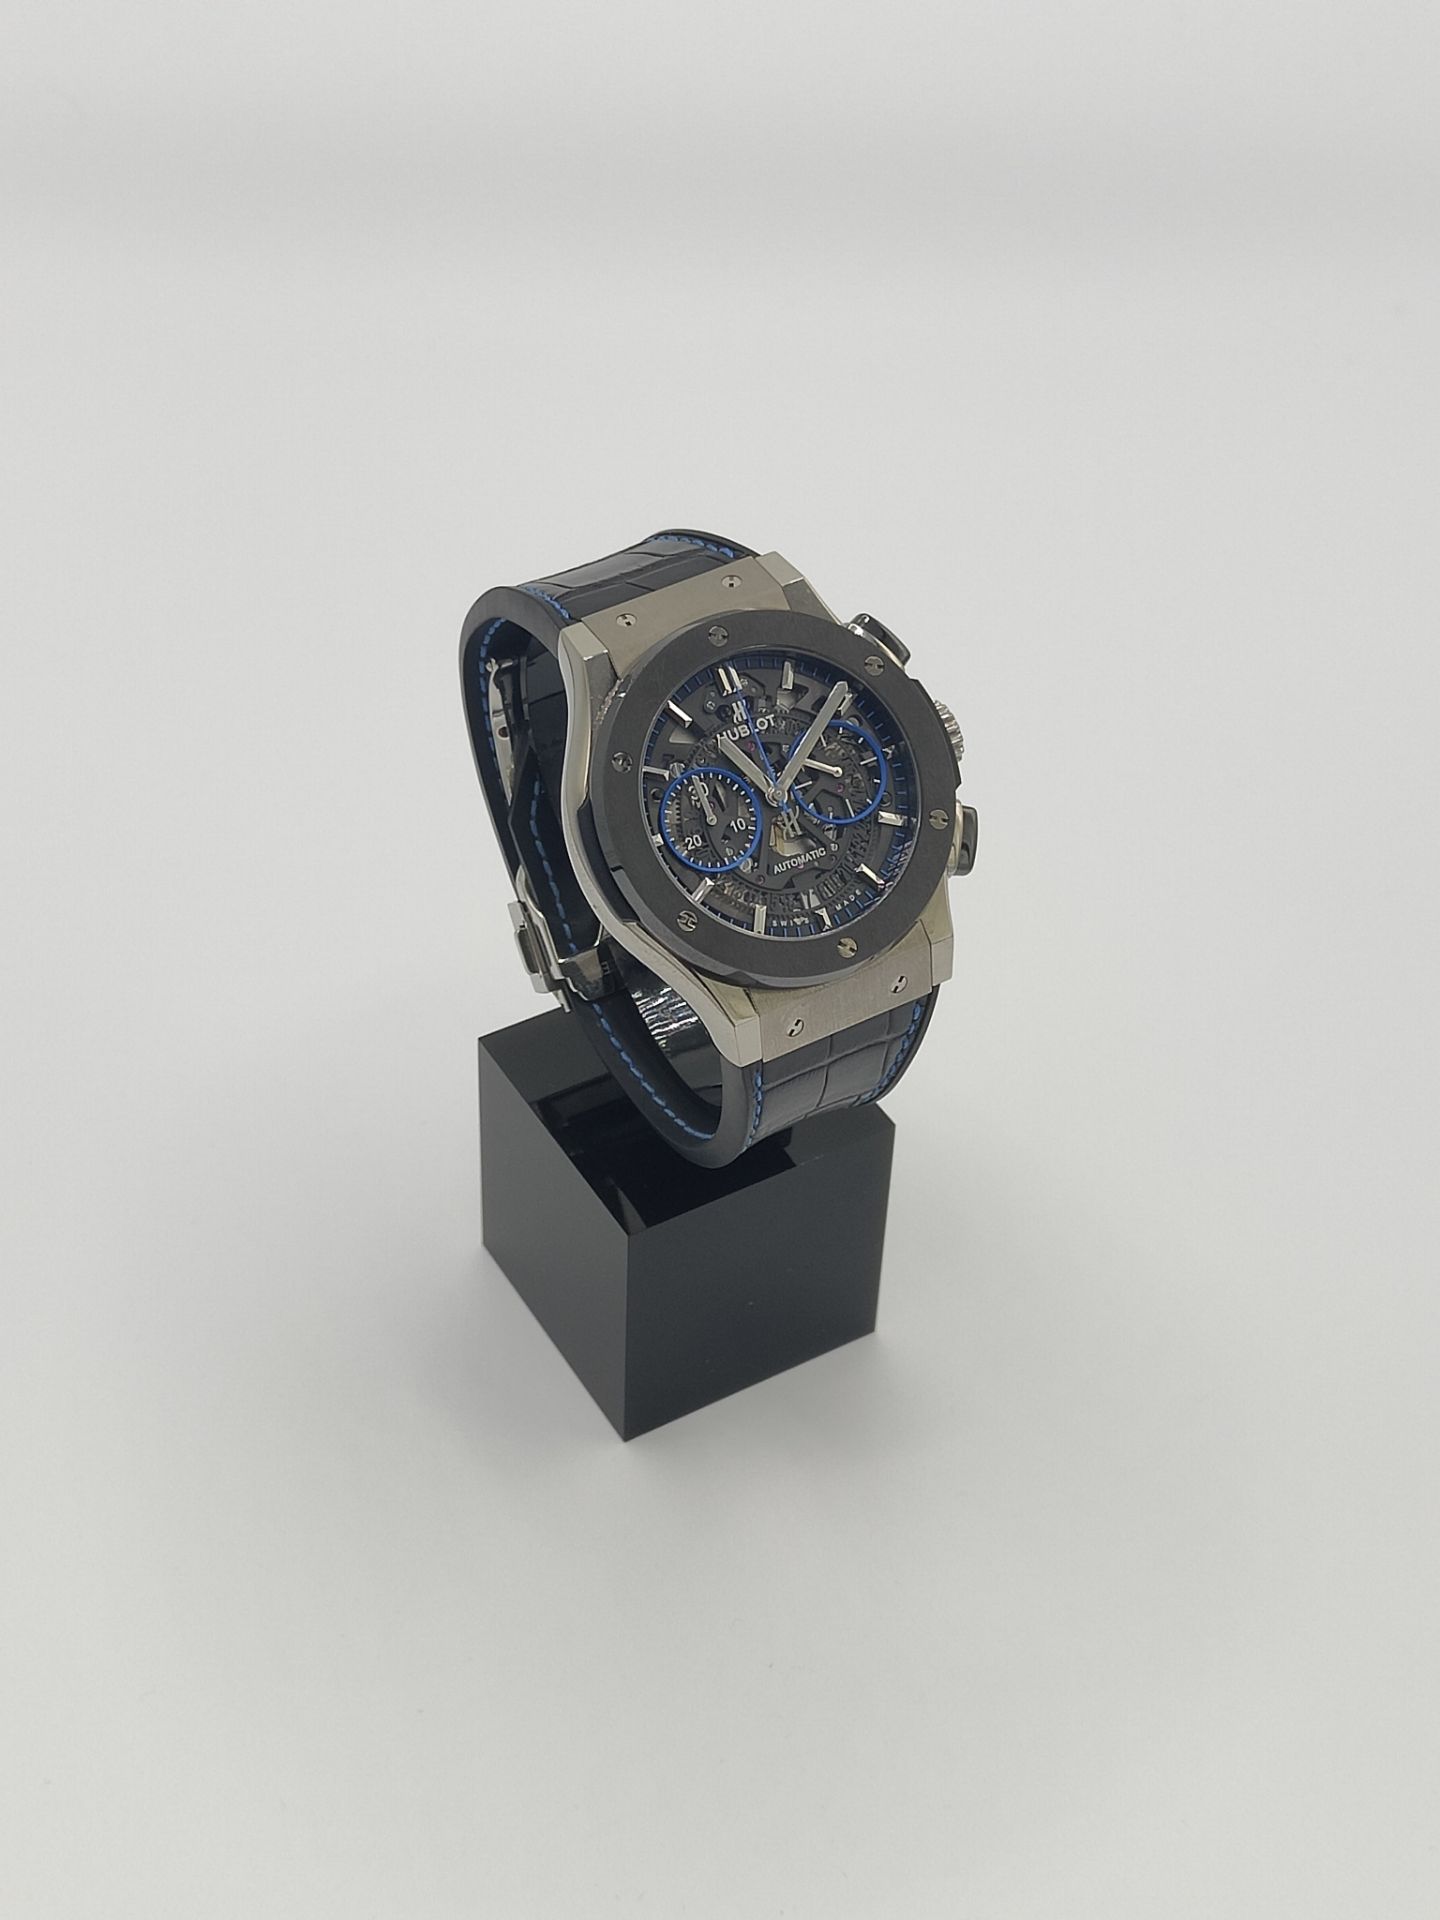 Hublot Classic Fusion Special Edition Watch - Image 2 of 11